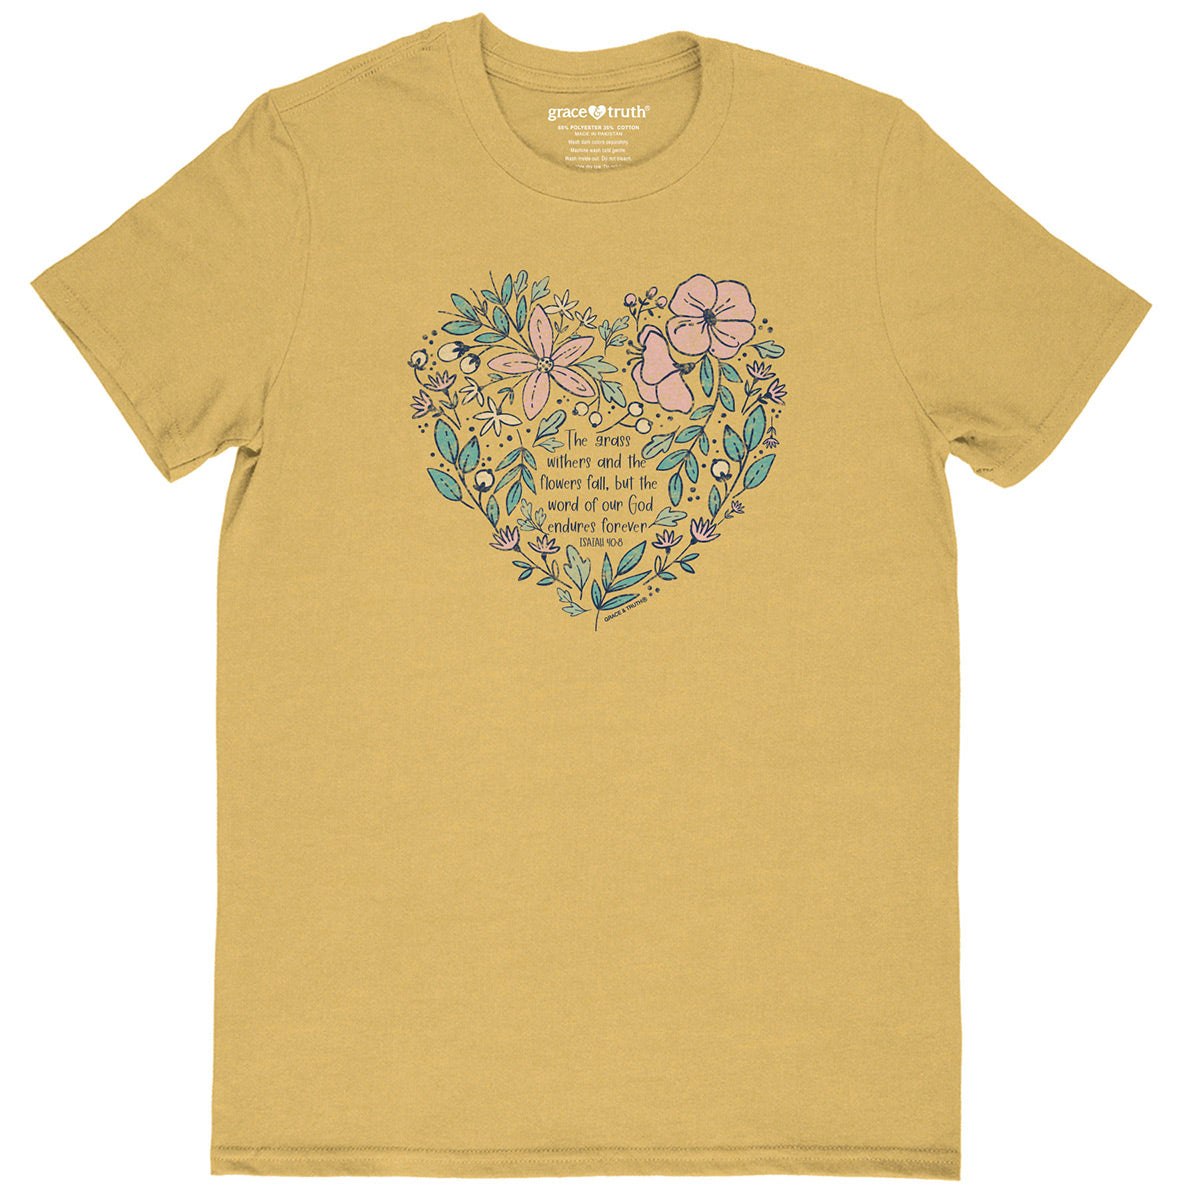 grace & truth Womens T-Shirt The Grass Withers And The Flowers Fade